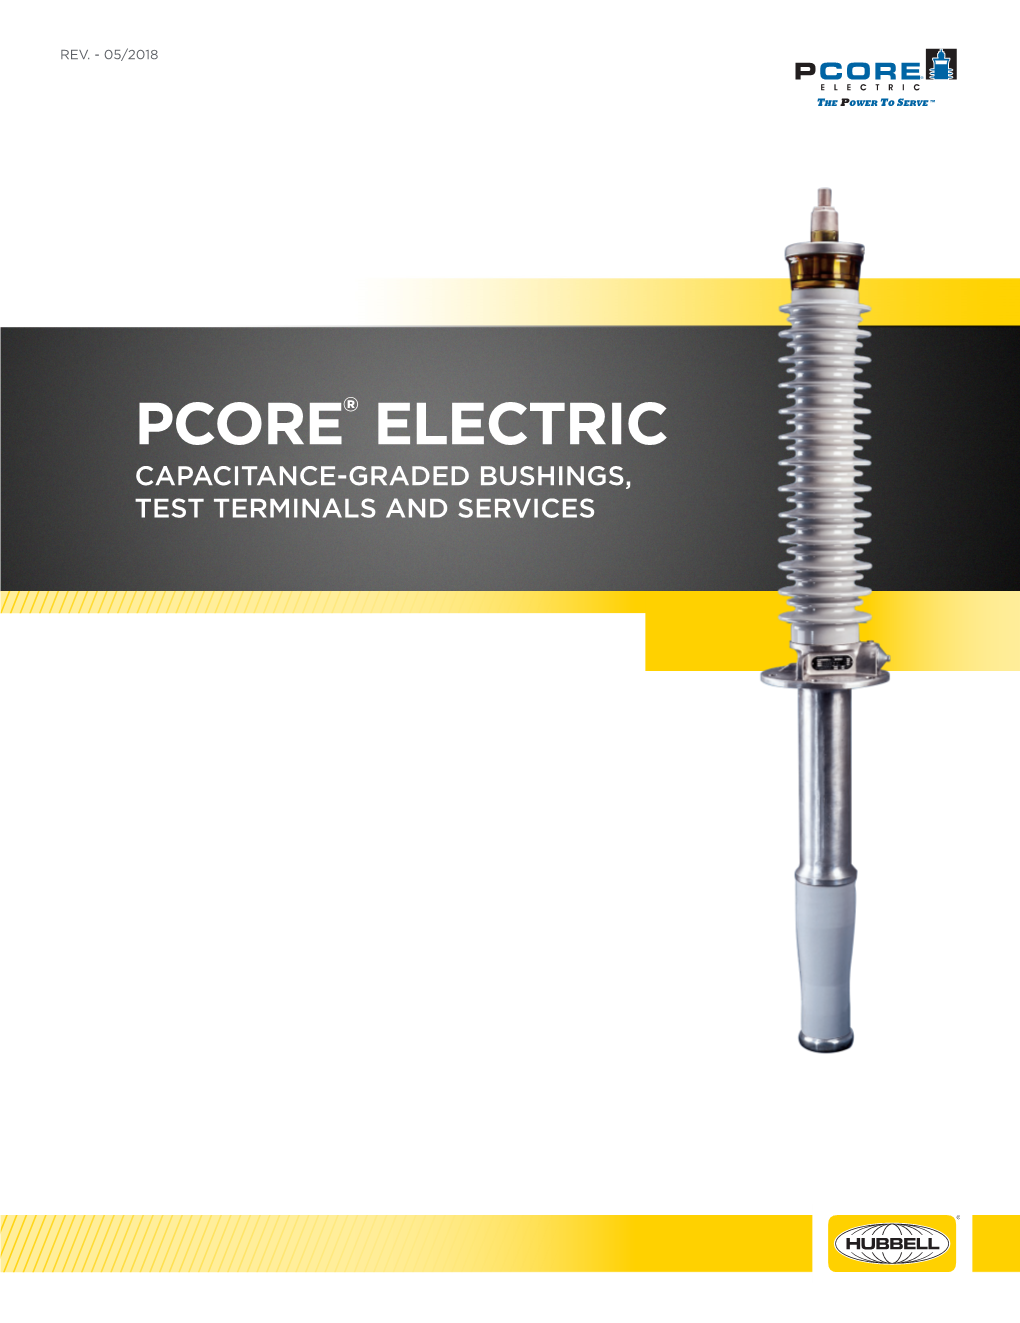 Pcore® Electric Capacitance-Graded Bushings, Test Terminals and Services